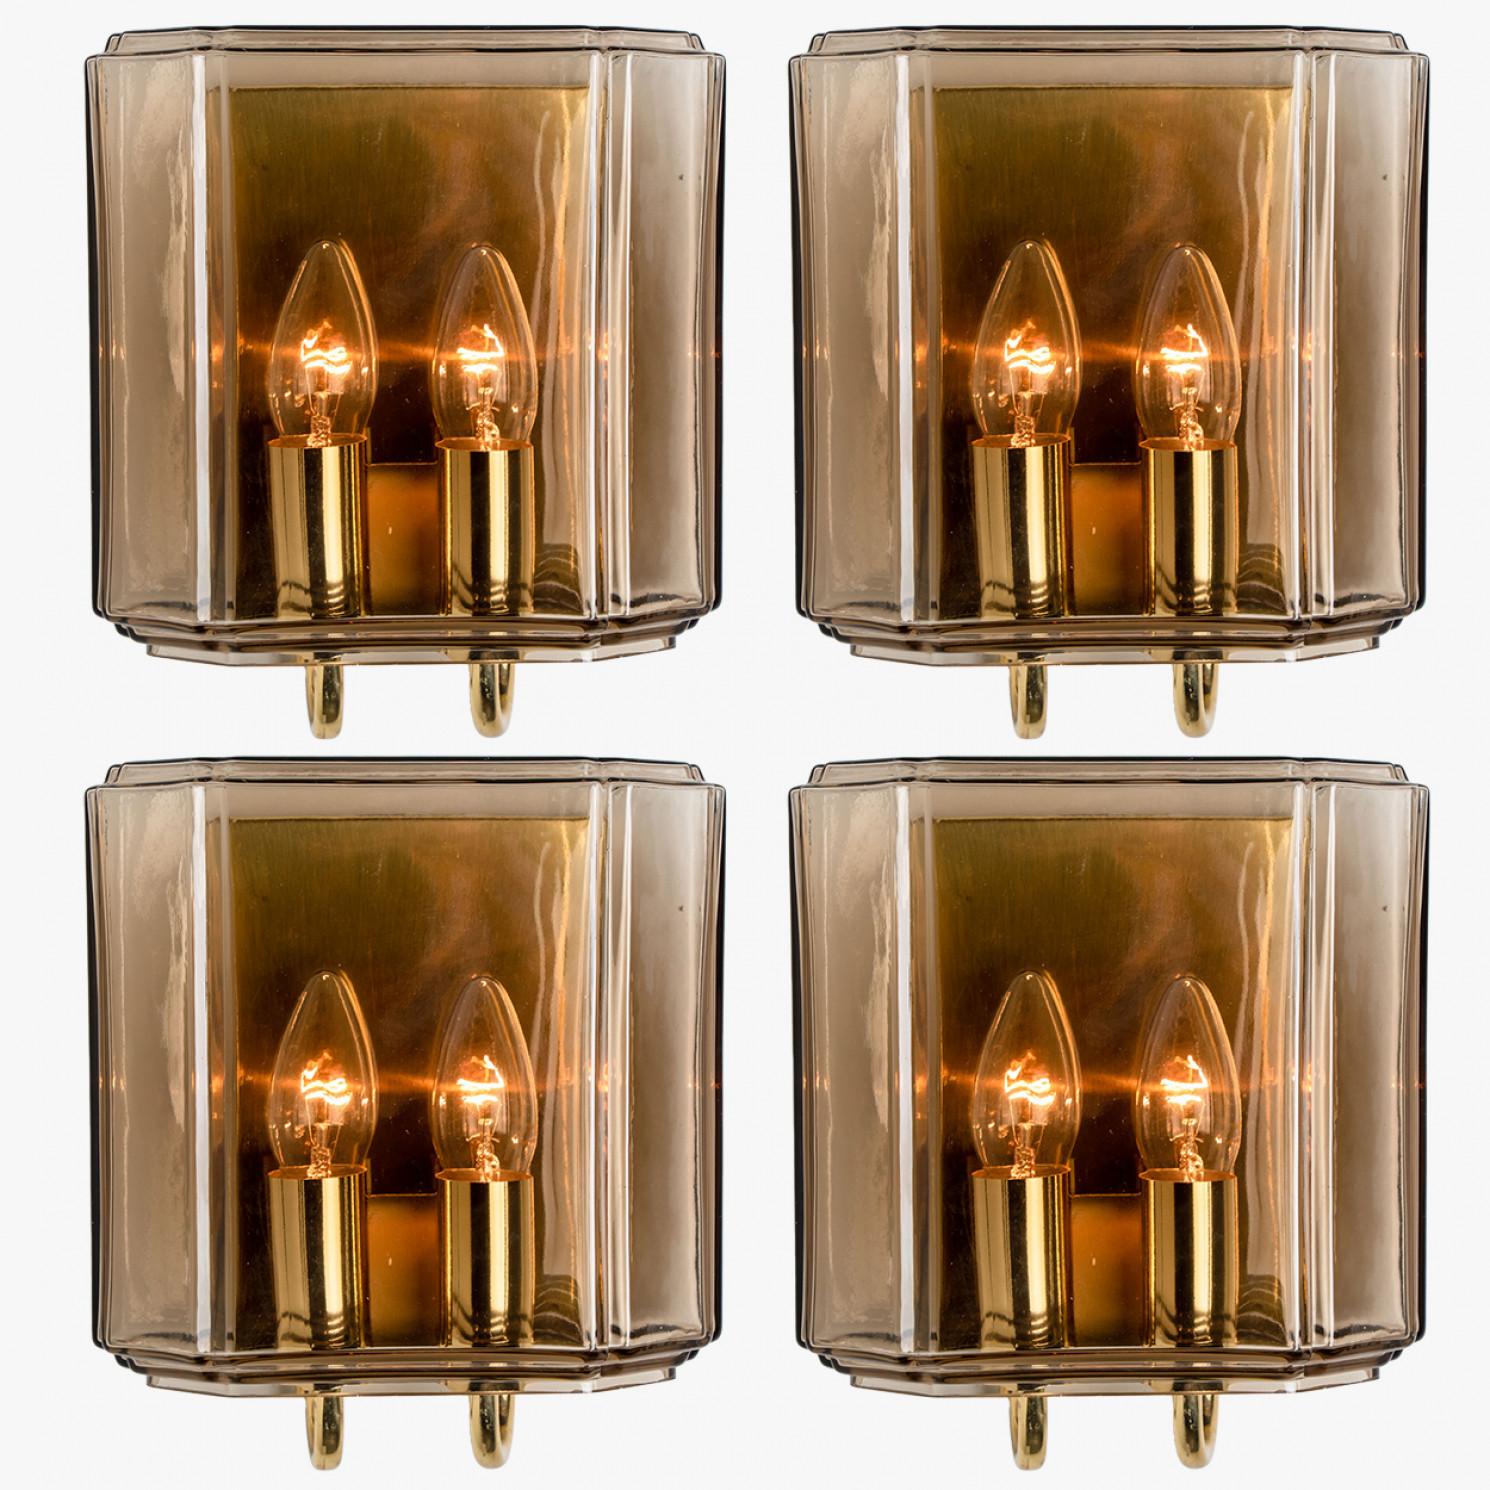 Other One of the two Pairs of Smoked Glass Wall Lights Sconces by Glashütte Limburg, 1 For Sale